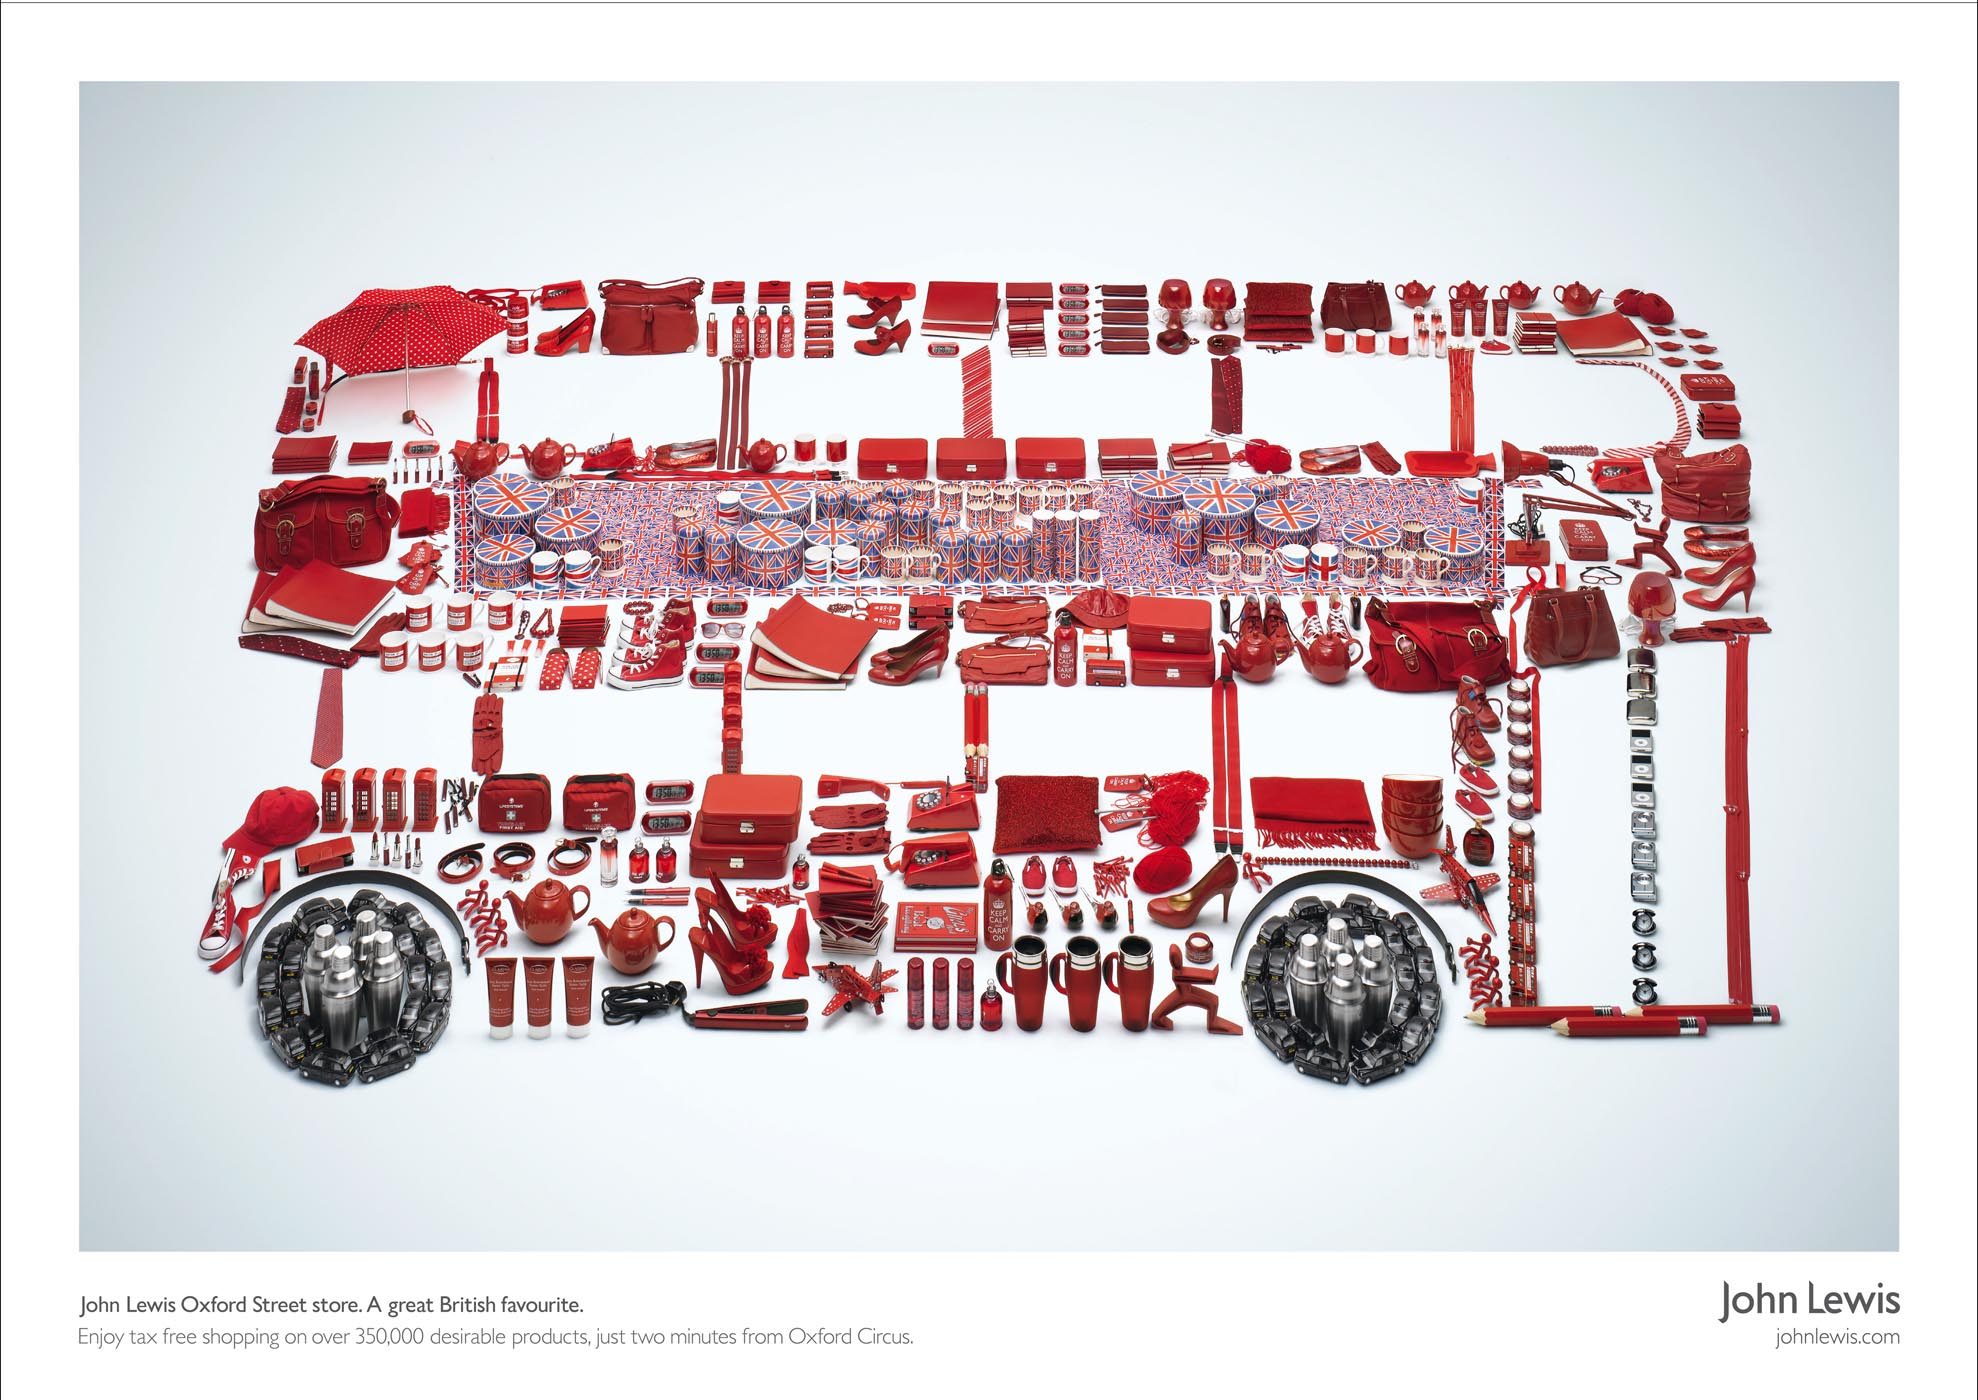 London bus  by Alexander Kent London based still life and product photographer.